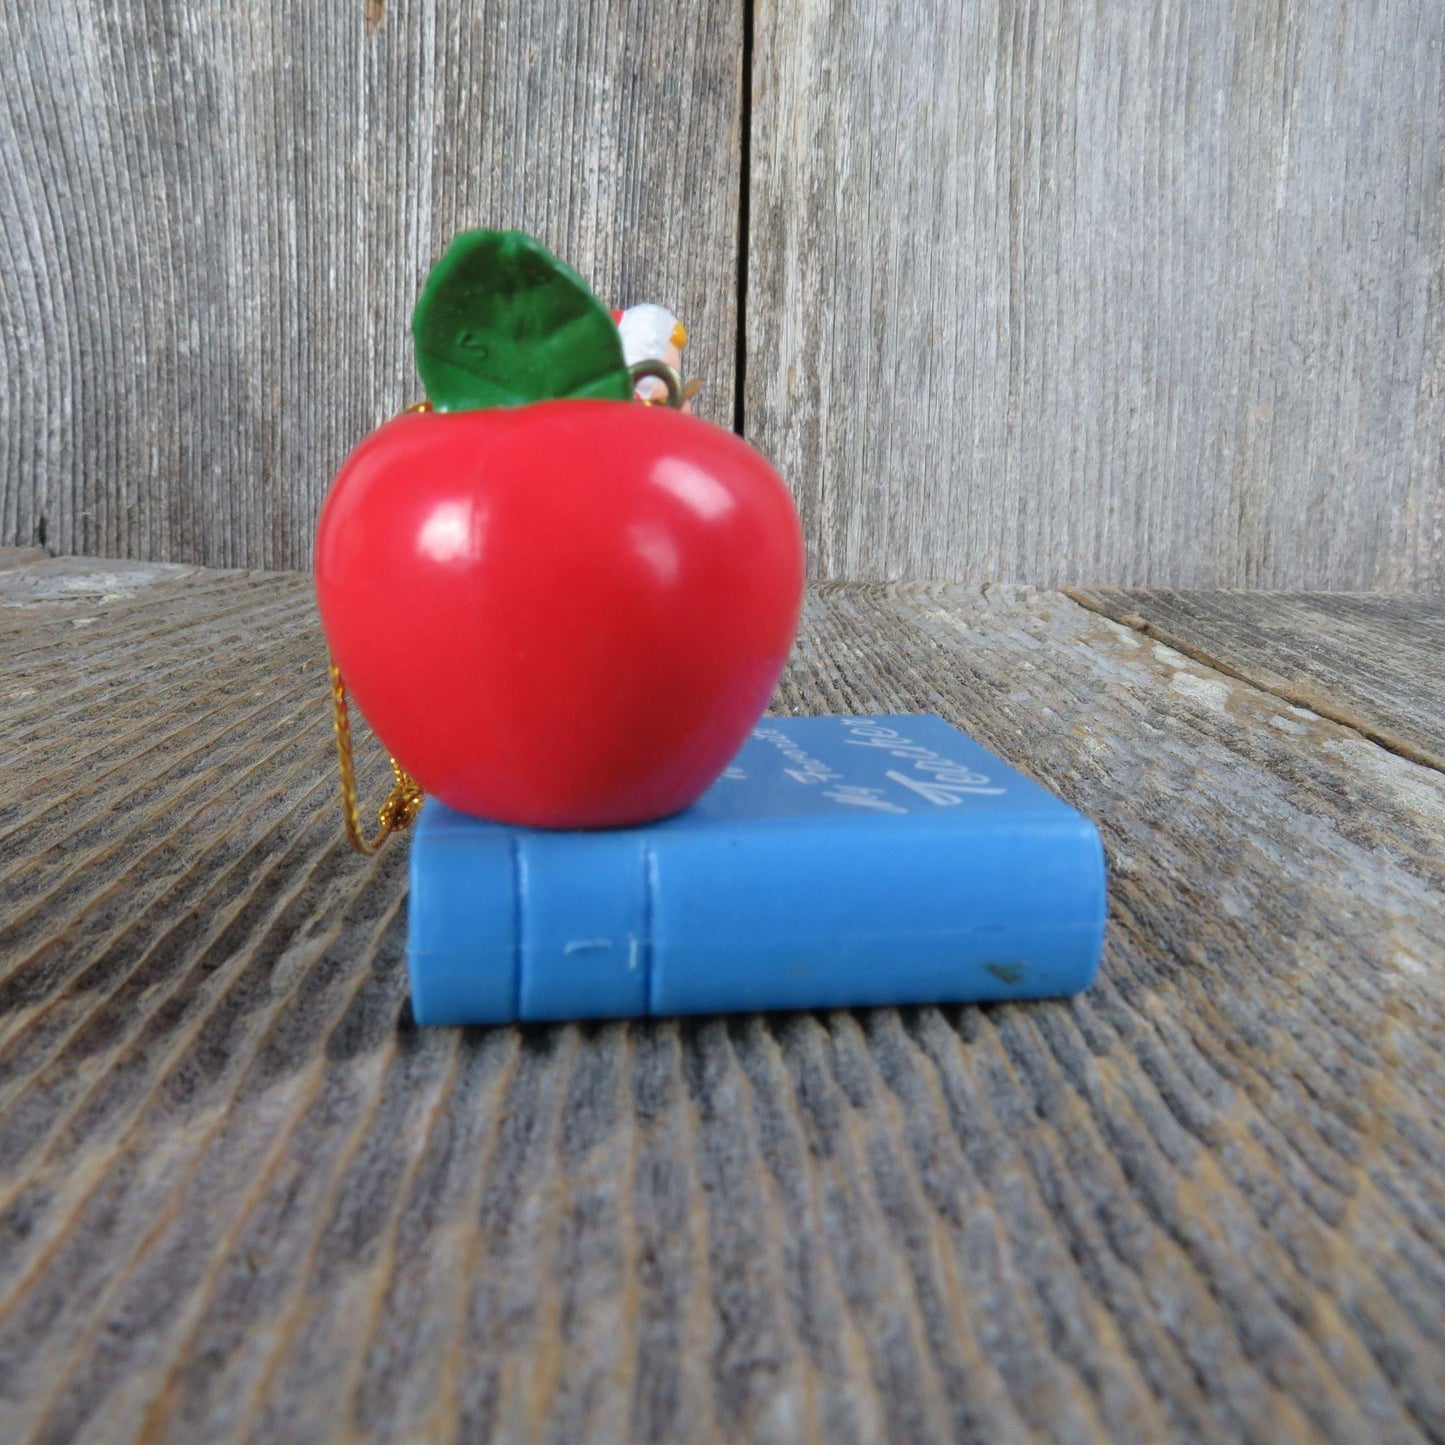 Vintage Boy Apple Book Ornament To My Favorite Teacher Blue Red Rubber